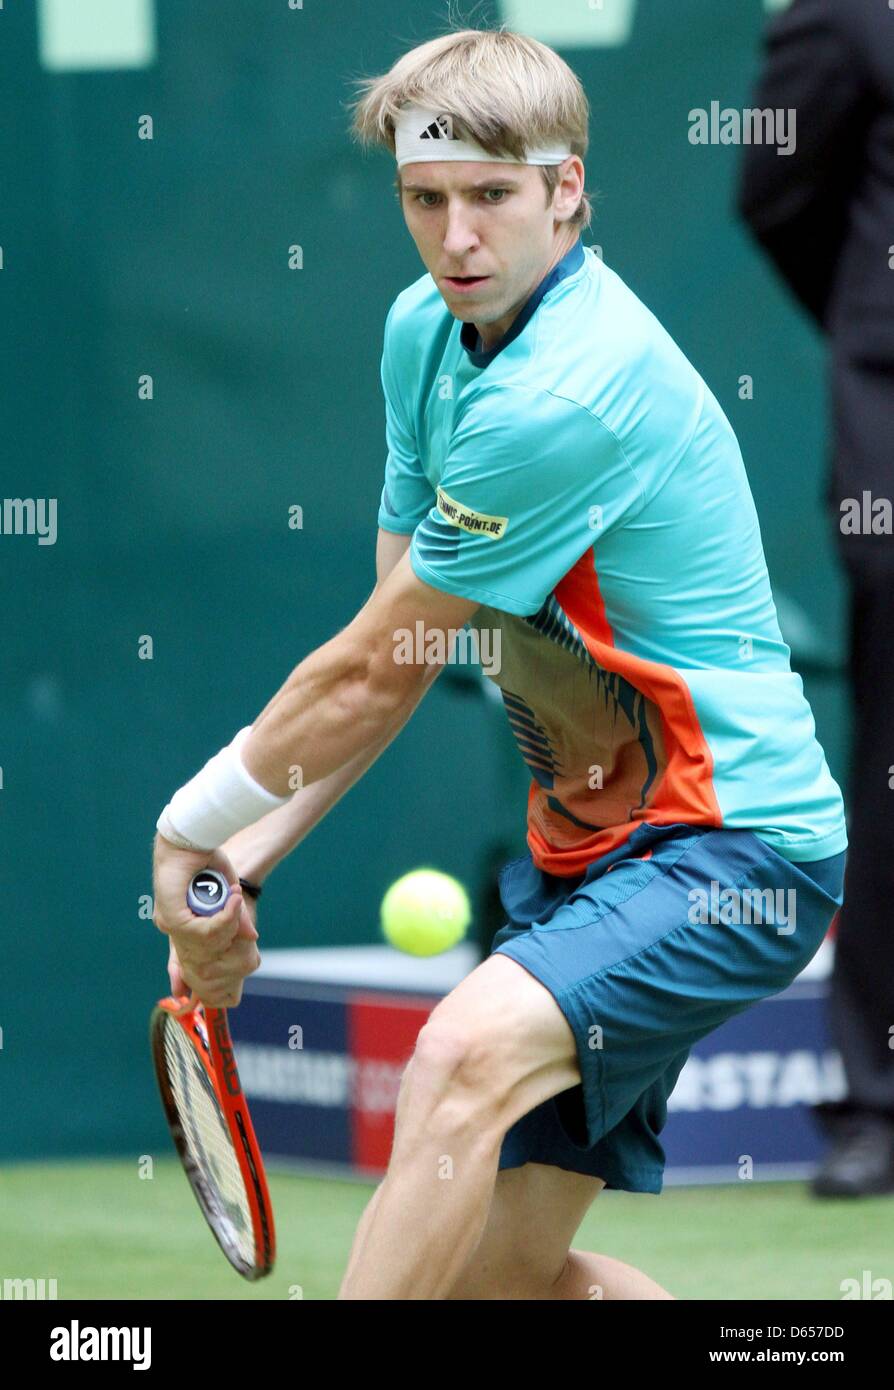 Germany's Cedrik-Marcel Stebe plays during the ATP Tennis Tournament in  Halle, Germany, 13 June 2012. Photo: OLIVER KRATO Stock Photo - Alamy